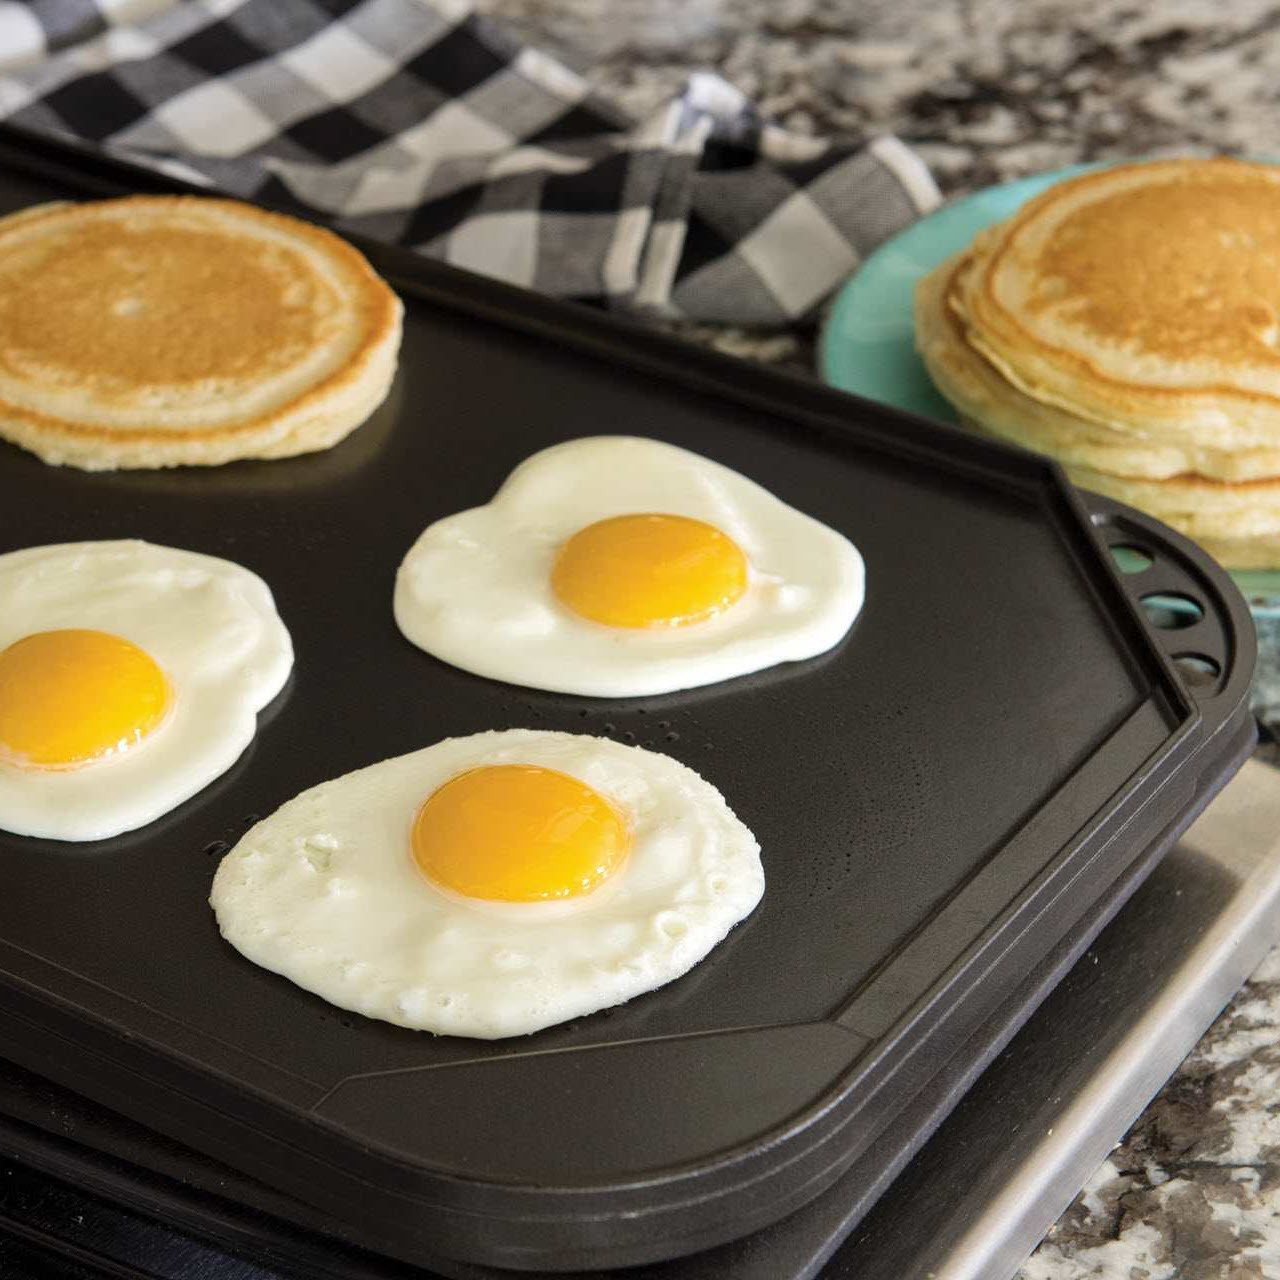 https://cdn11.bigcommerce.com/s-21kj3ntgv1/images/stencil/1280x1280/products/434/2613/NordicWare-ProCast-Classic-Original-Reversible-Griddle-with-Breakfast-Food__82868.1698614522.jpg?c=2